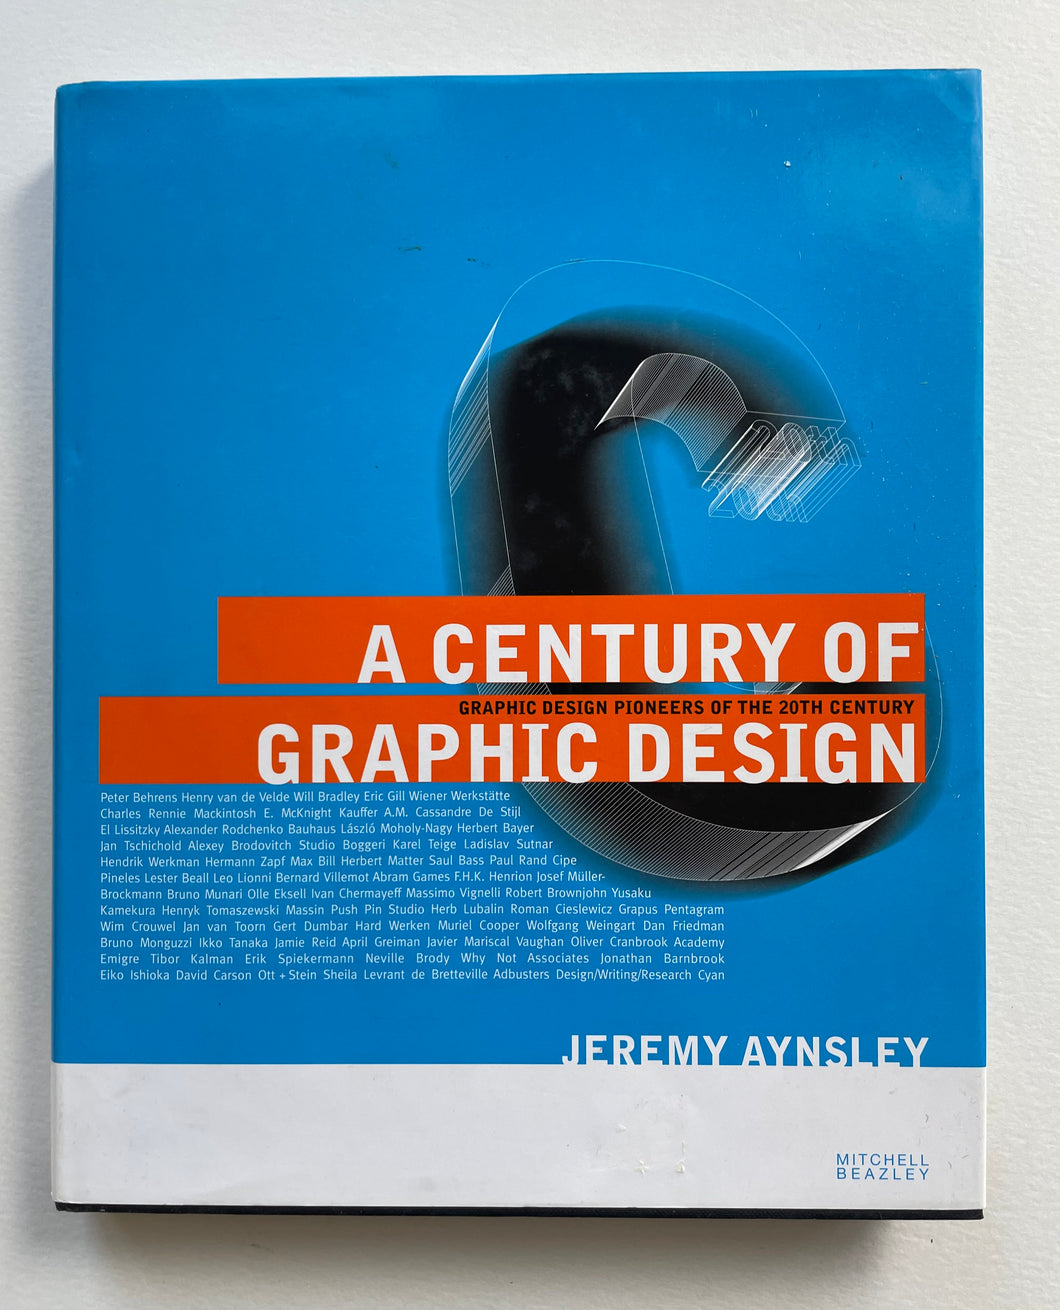 A century of graphic design | Jeremy Aynsley (mitchell Beasley)